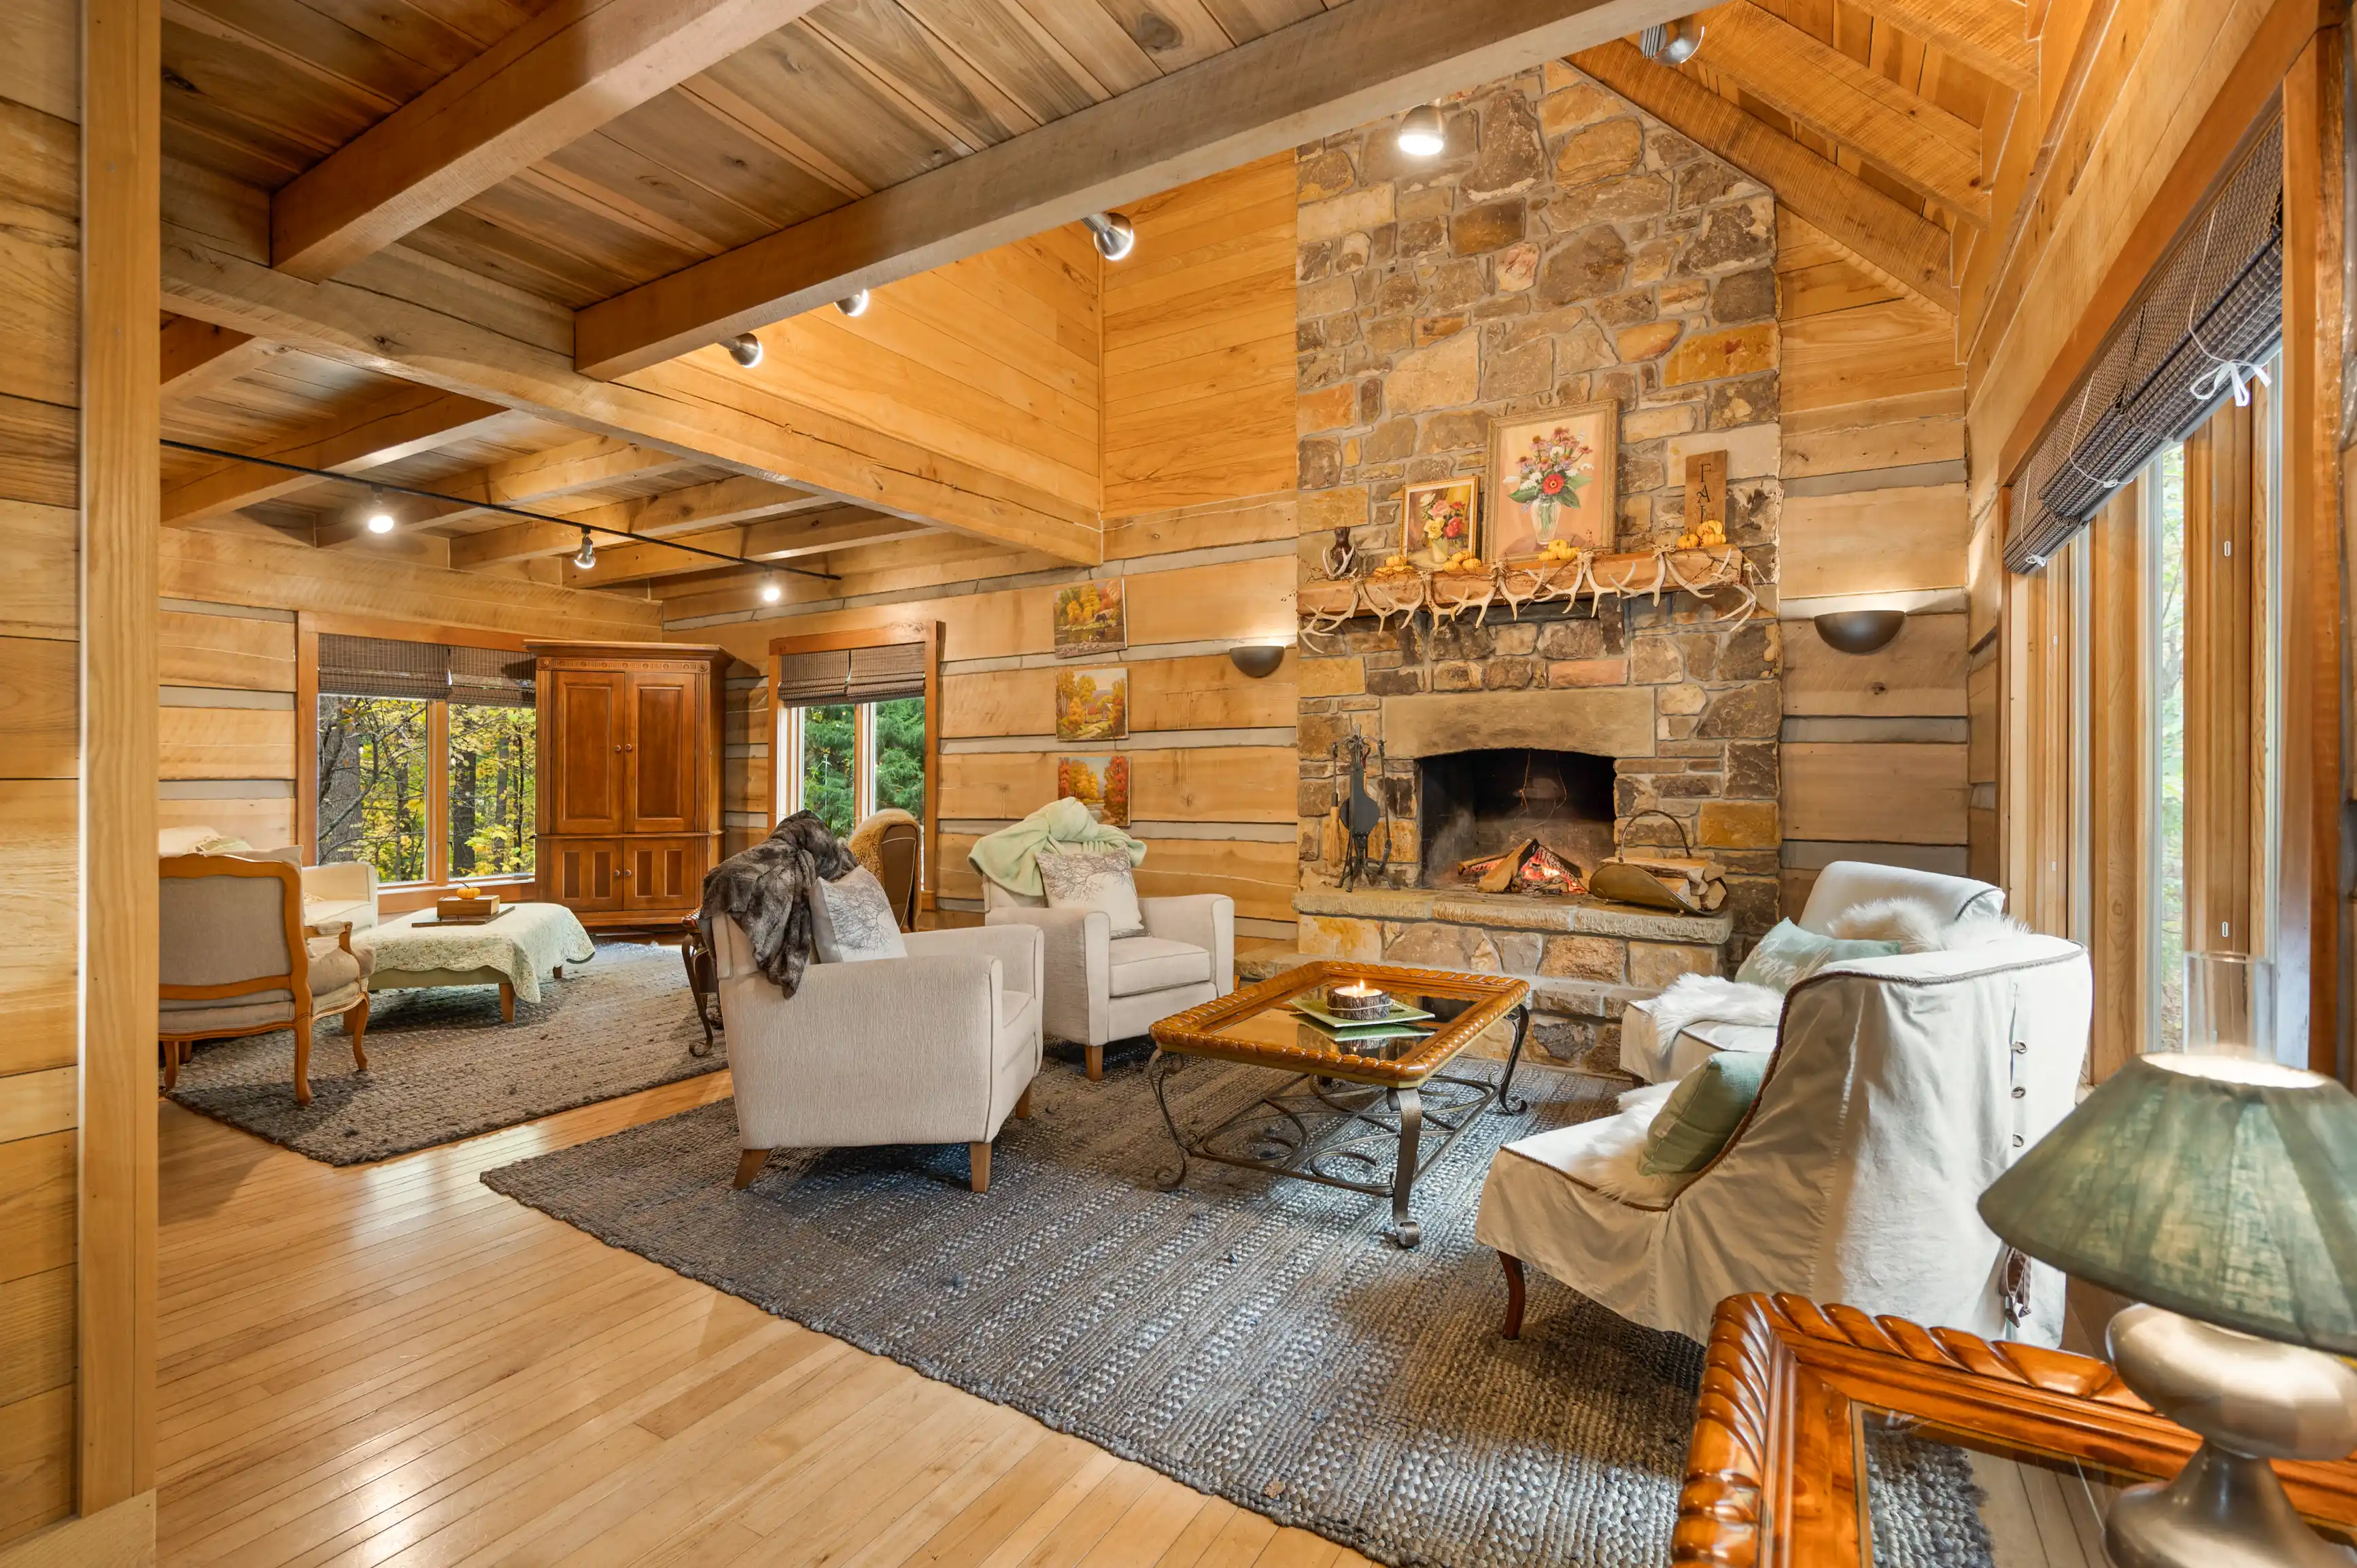 Cozy cabin living room interior with a stone fireplace, wooden walls, and rustic furniture.